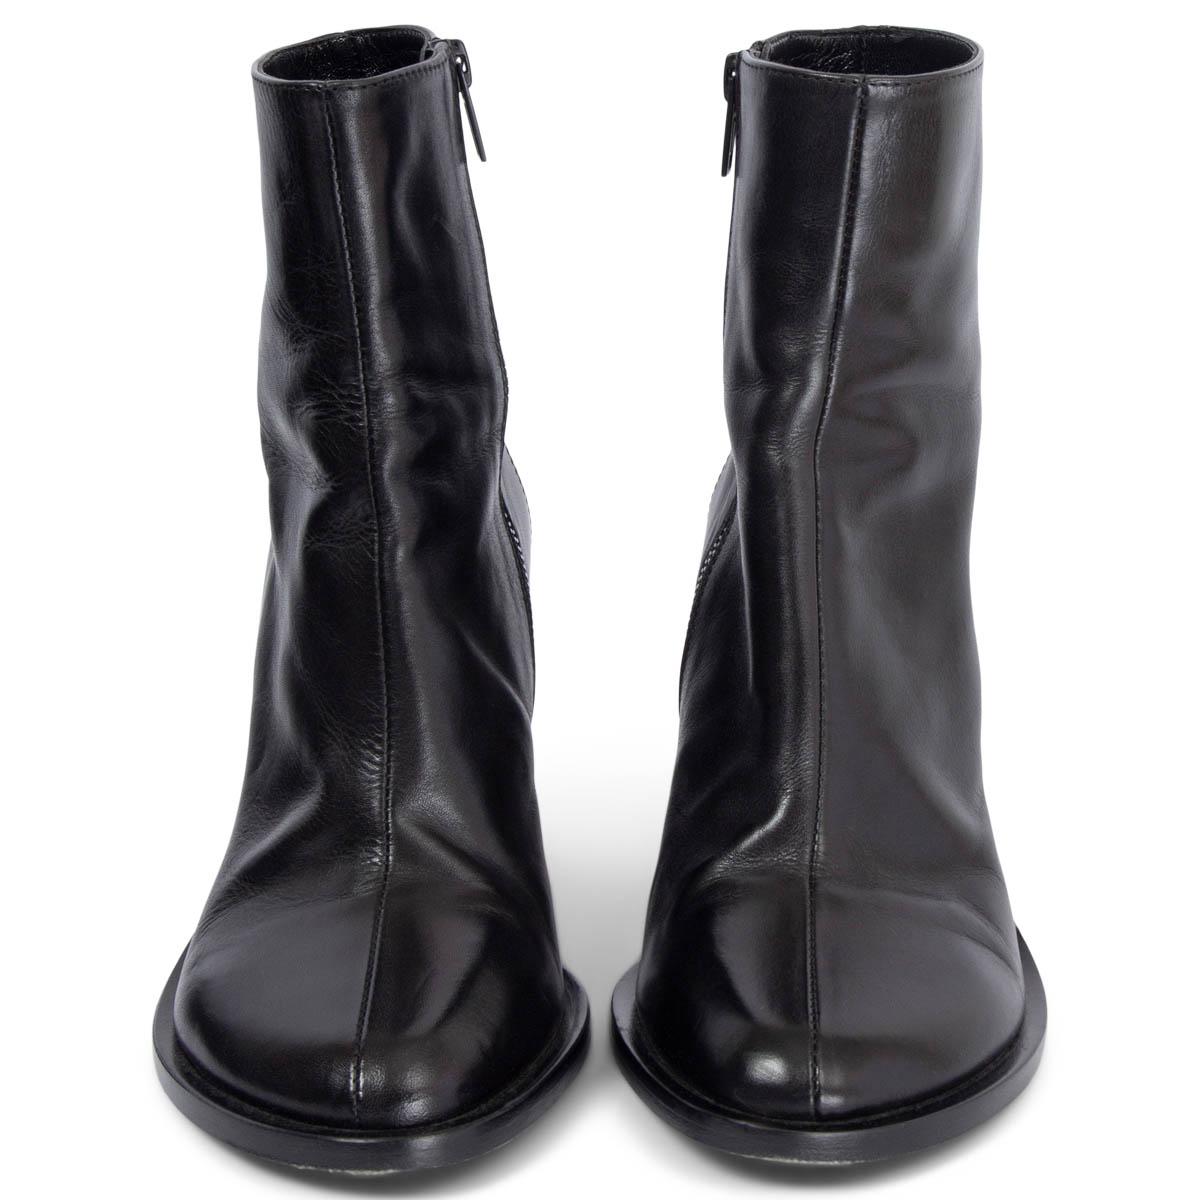 100% authentic Ann Demeulemeester Lisa ankle boots in black polished calfskin with concave heel shape. Open with a inner-side zipper. Have been worn and are in excellent condition. Come with dust bags.

Measurements
Imprinted Size	37
Shoe